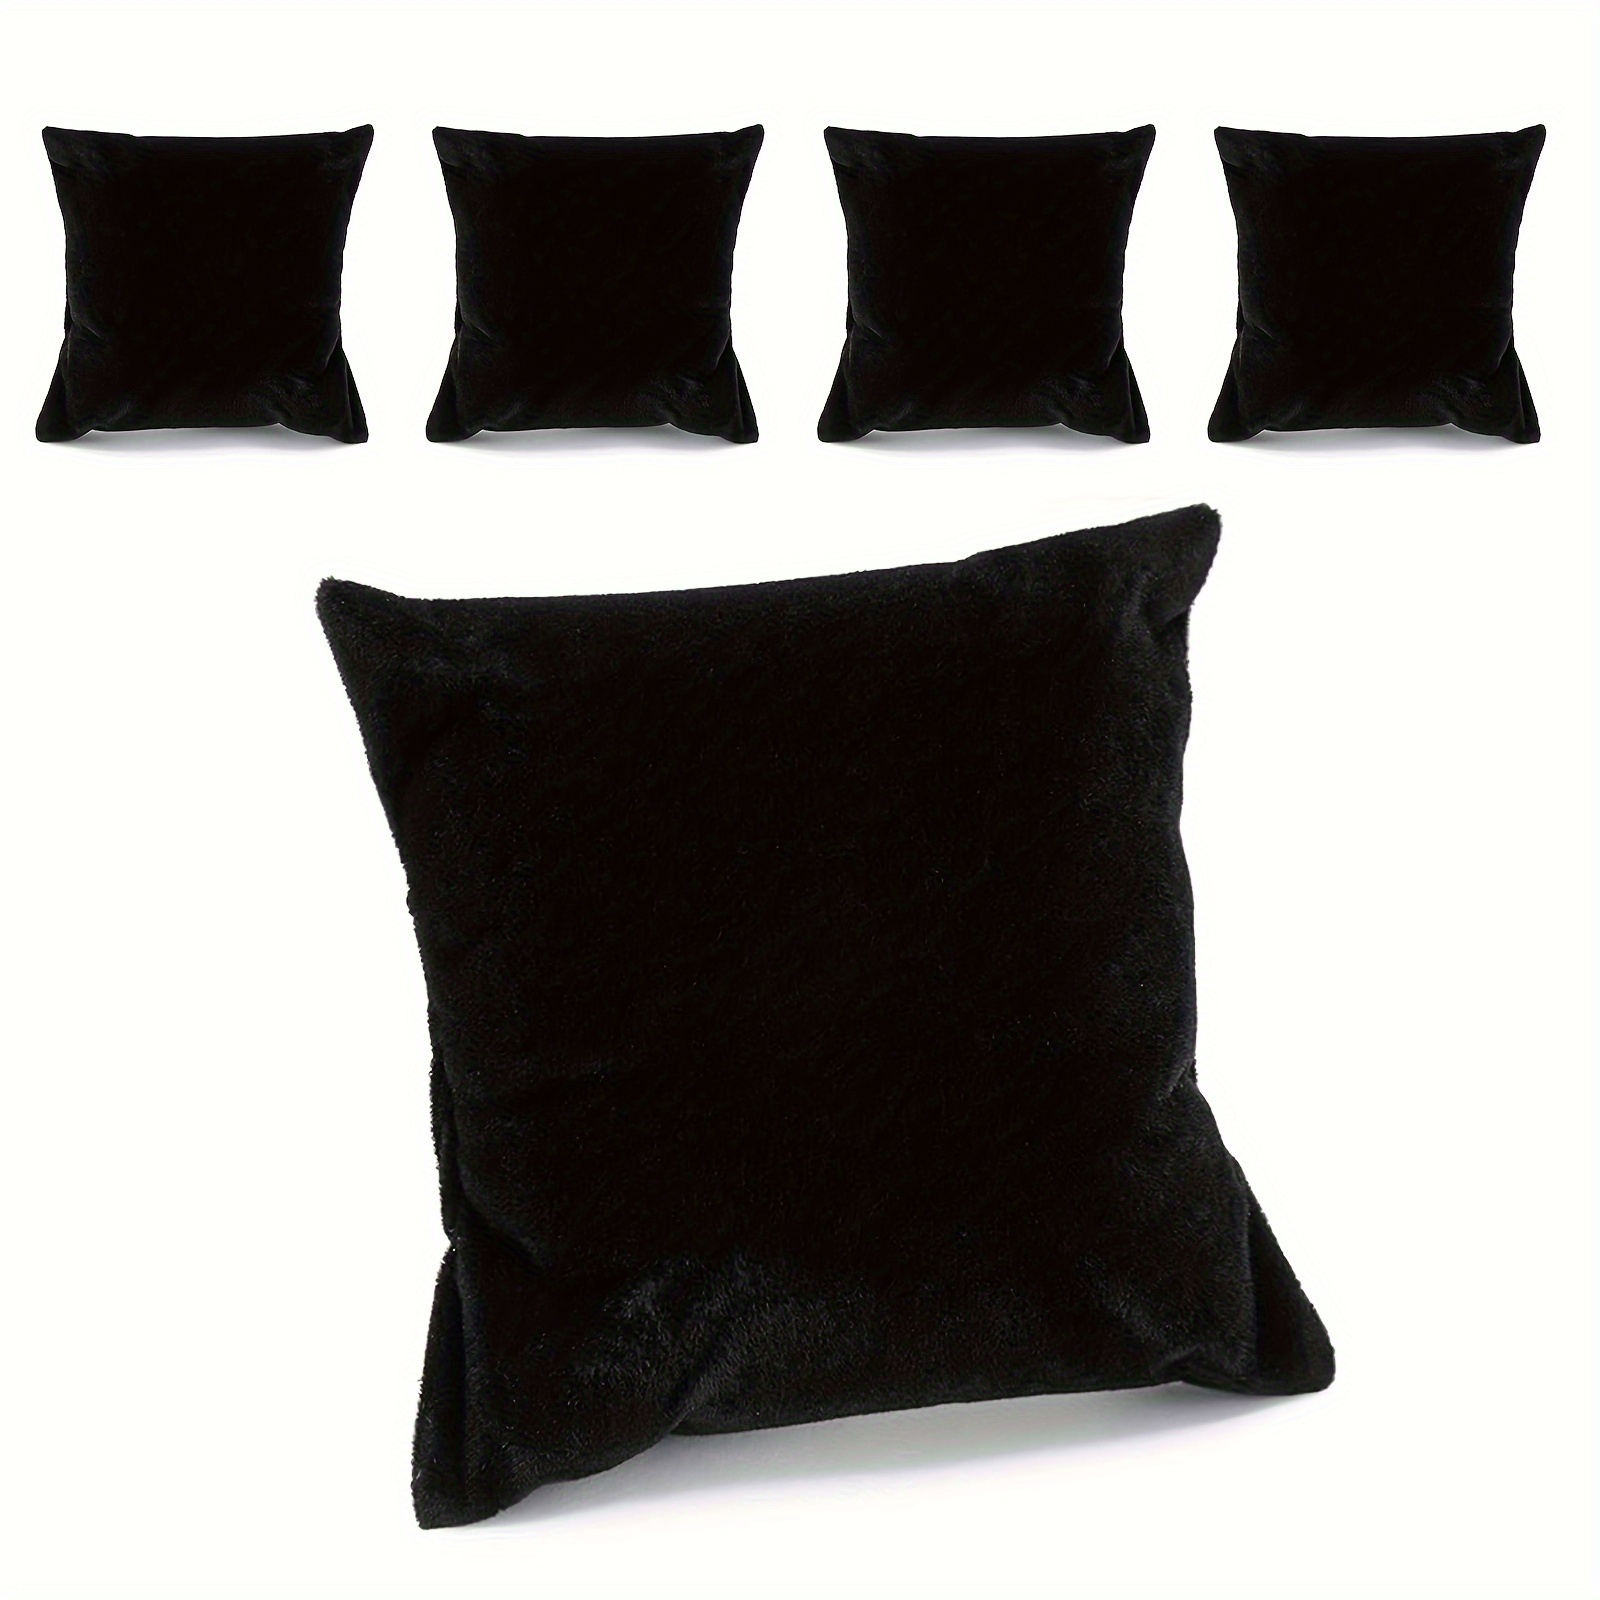 

5pcs Black Velvet Pillows For Watches And Bracelets Jewelry Display Cushions Gift Box Inside Accessories, 3.5x3inch Retail Show Elegant Supplies